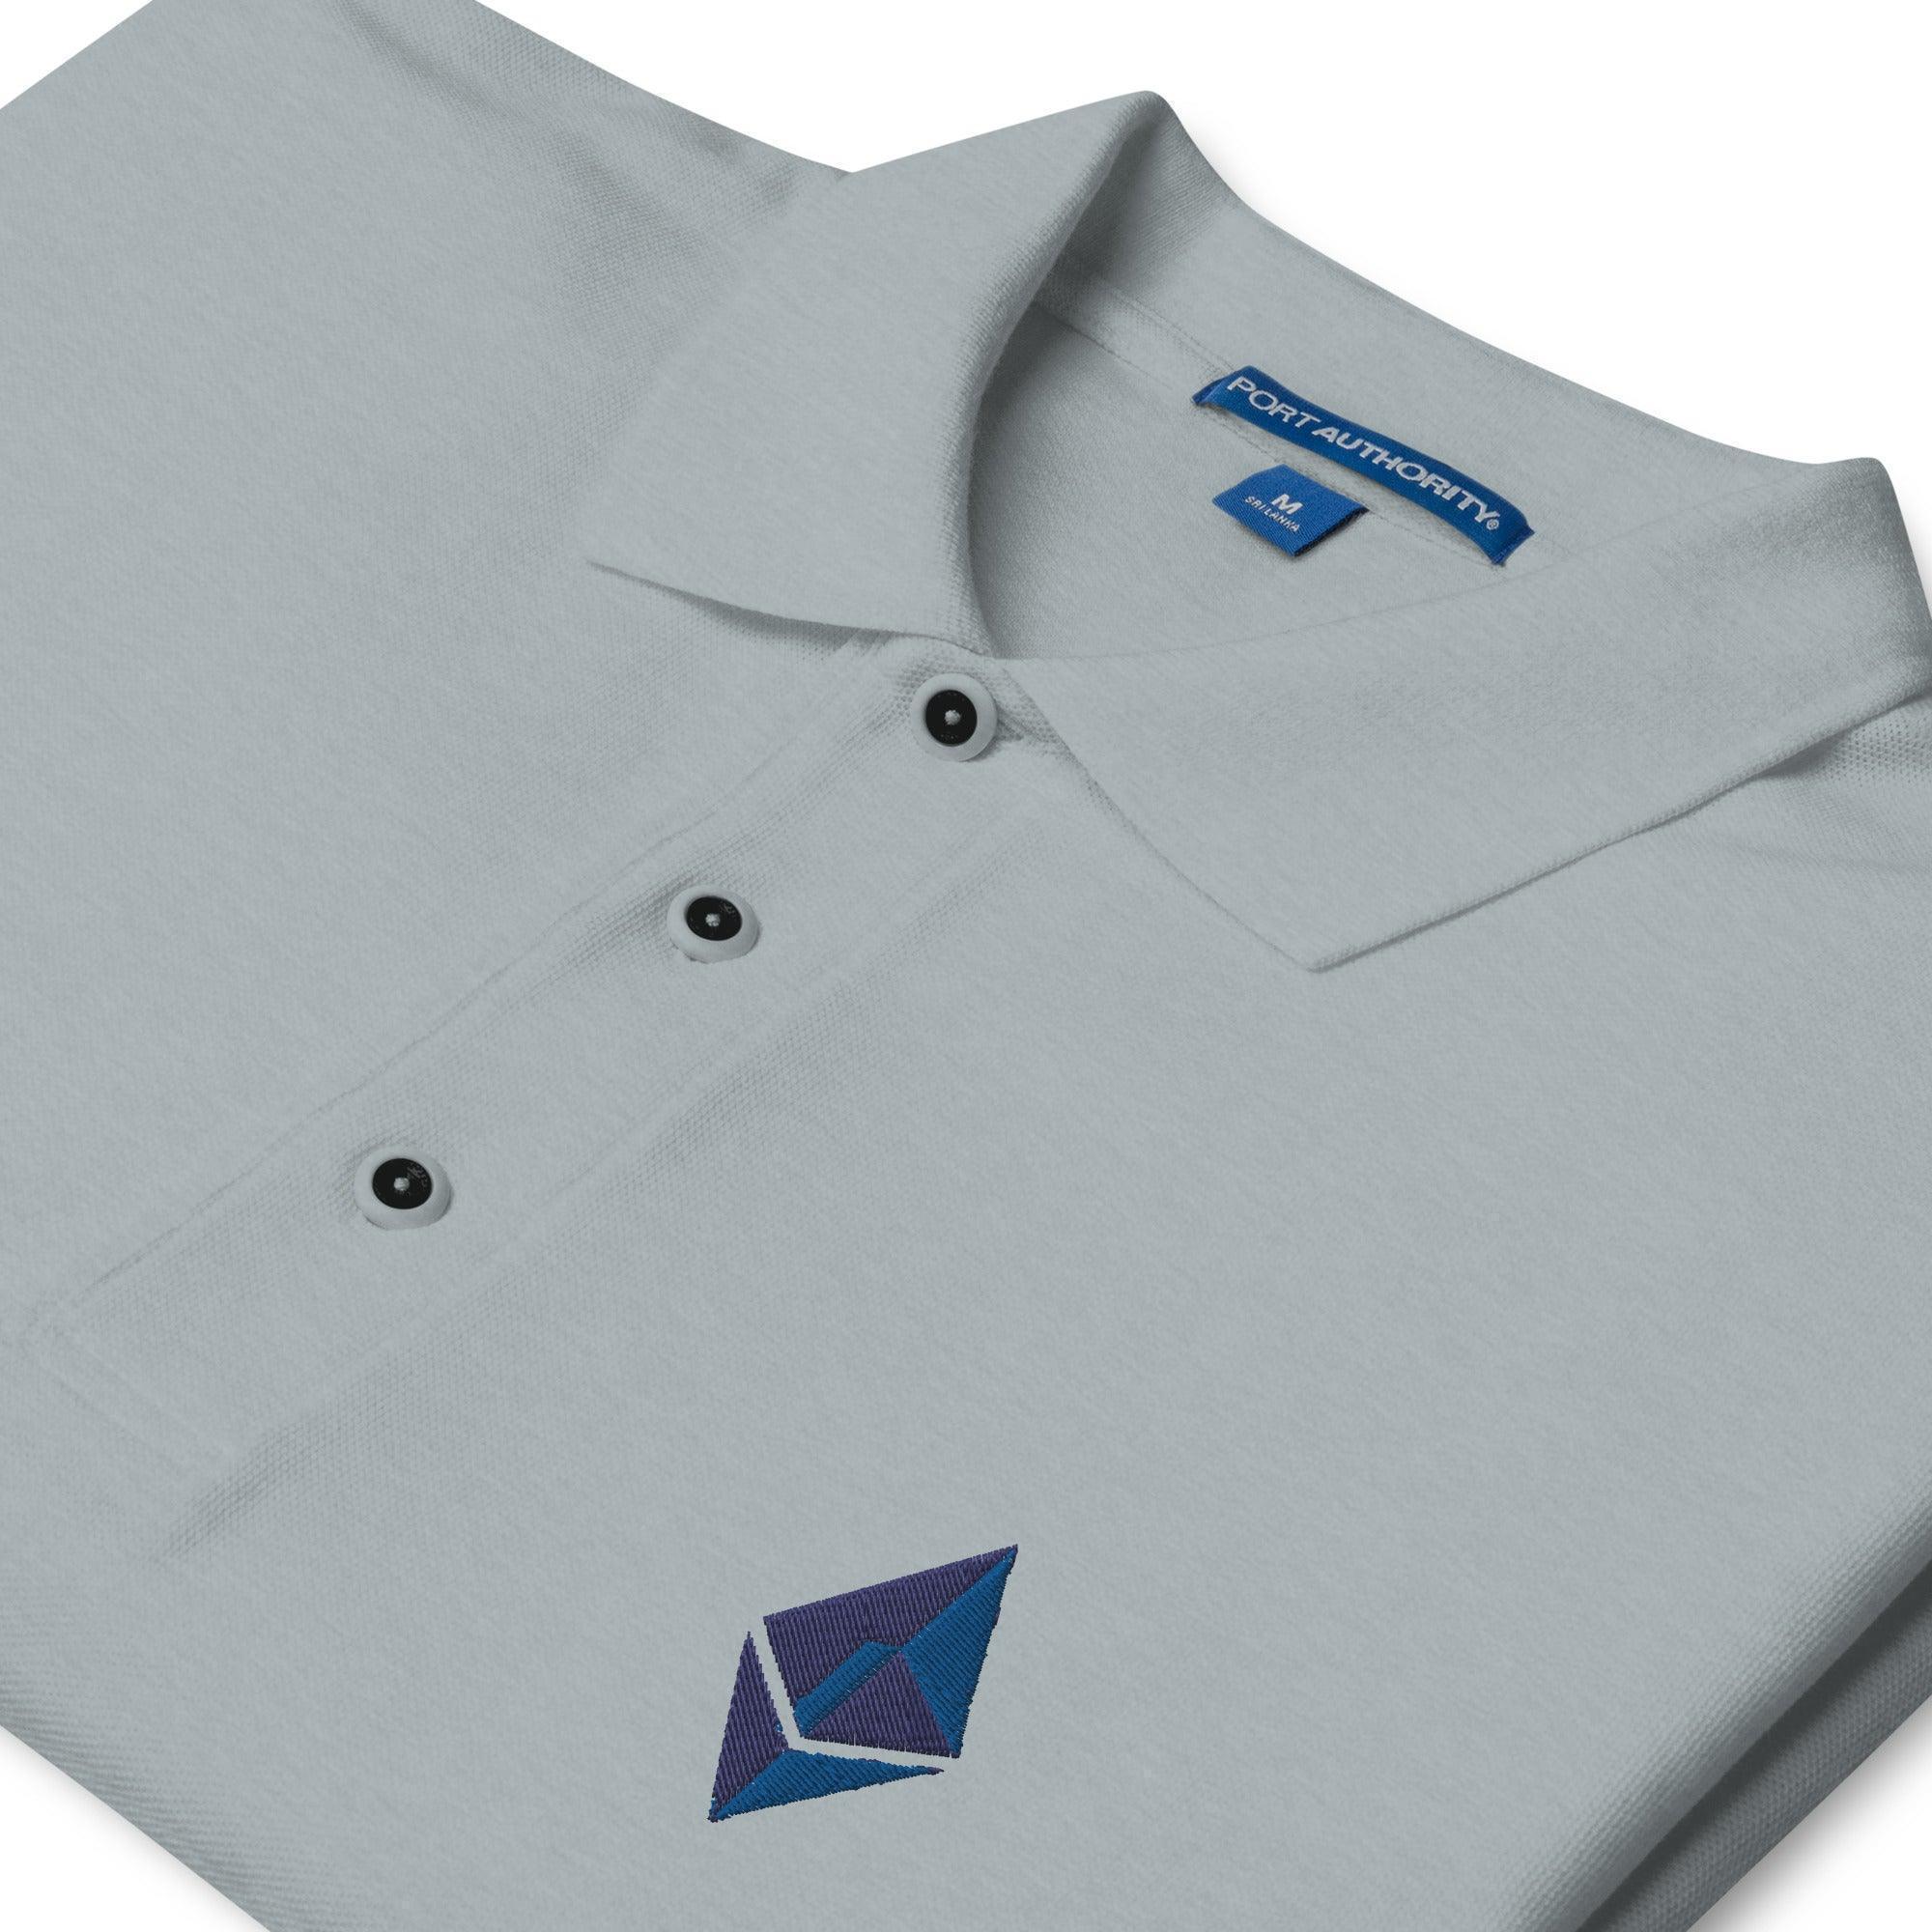 Ethereum Polo Shirt - InvestmenTees